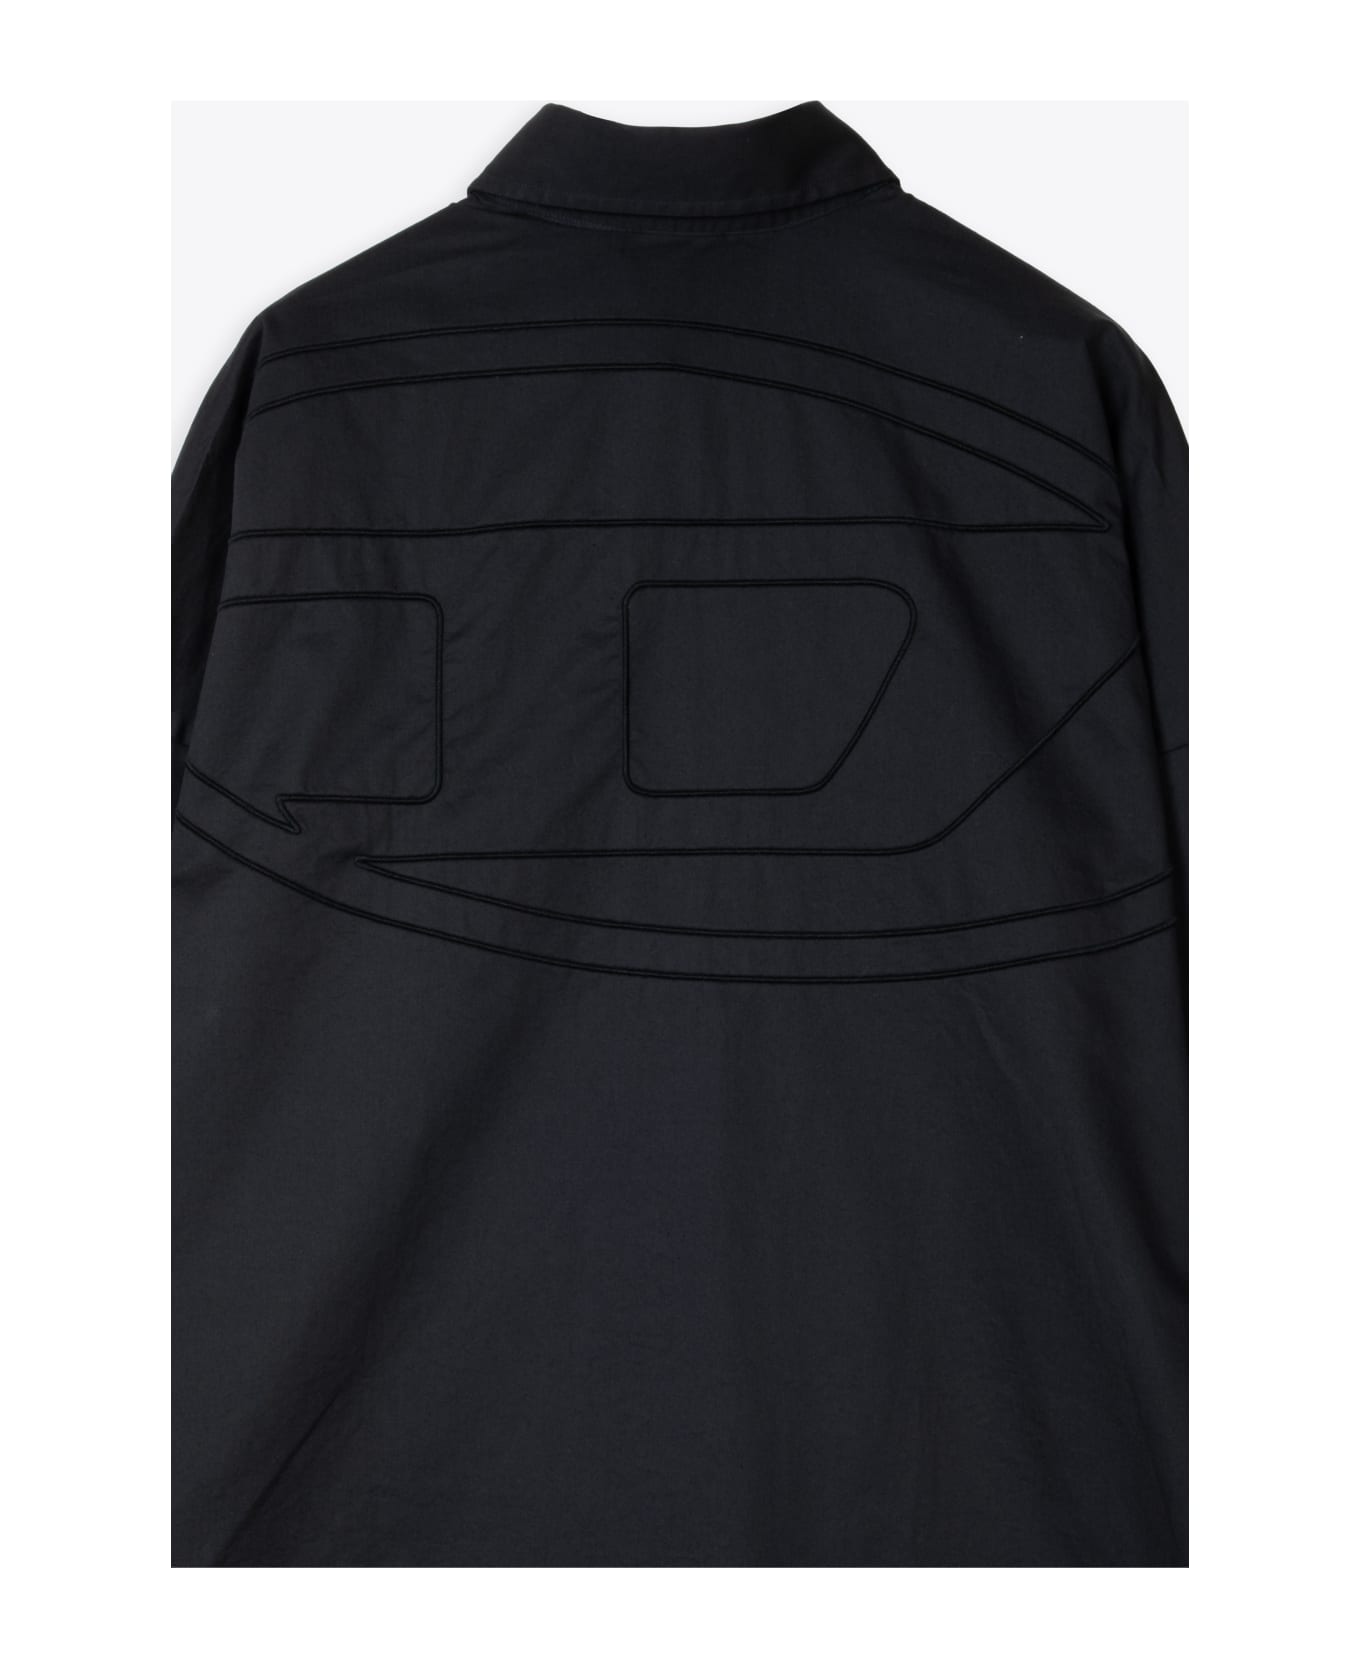 Diesel S-limo-logo Camicia Black Cotton Oversized Shirt With Oval-d Logo - S Limo Logo - Nero